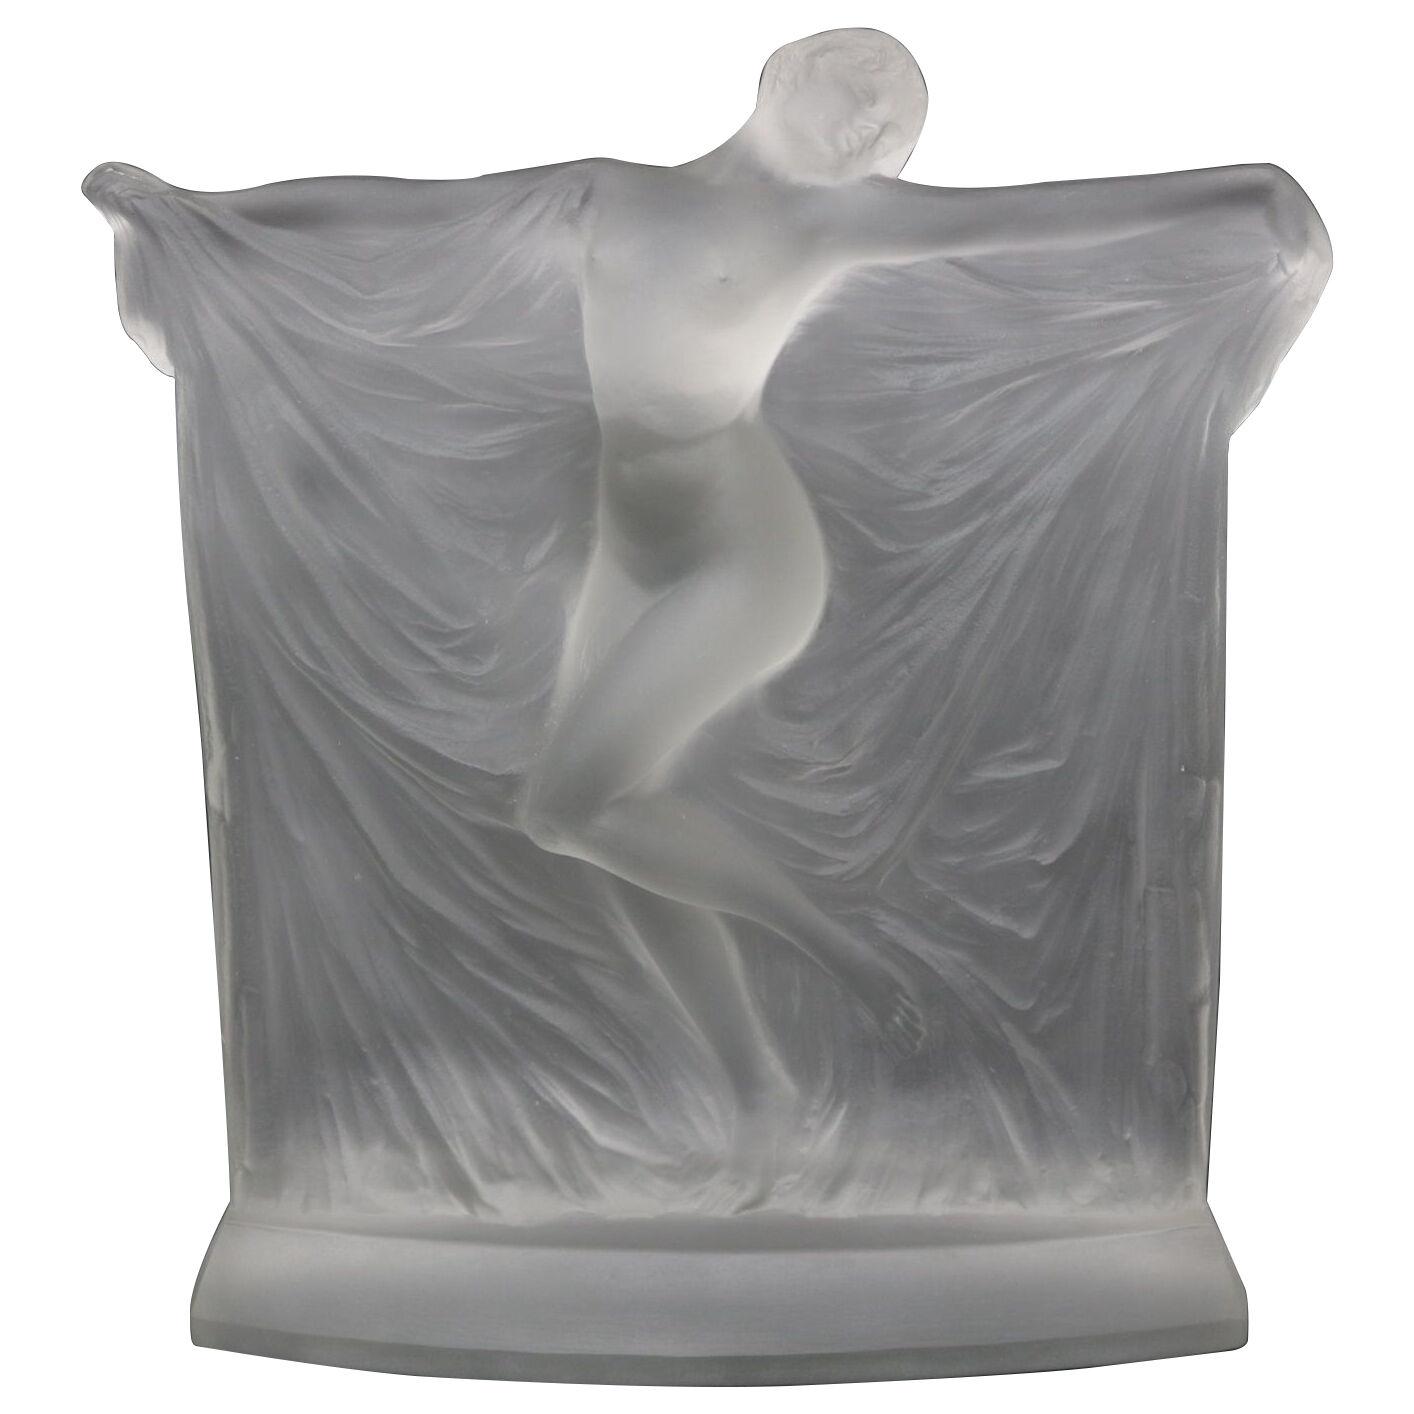 Rene Lalique Frosted Glass 'Thais' Statuette